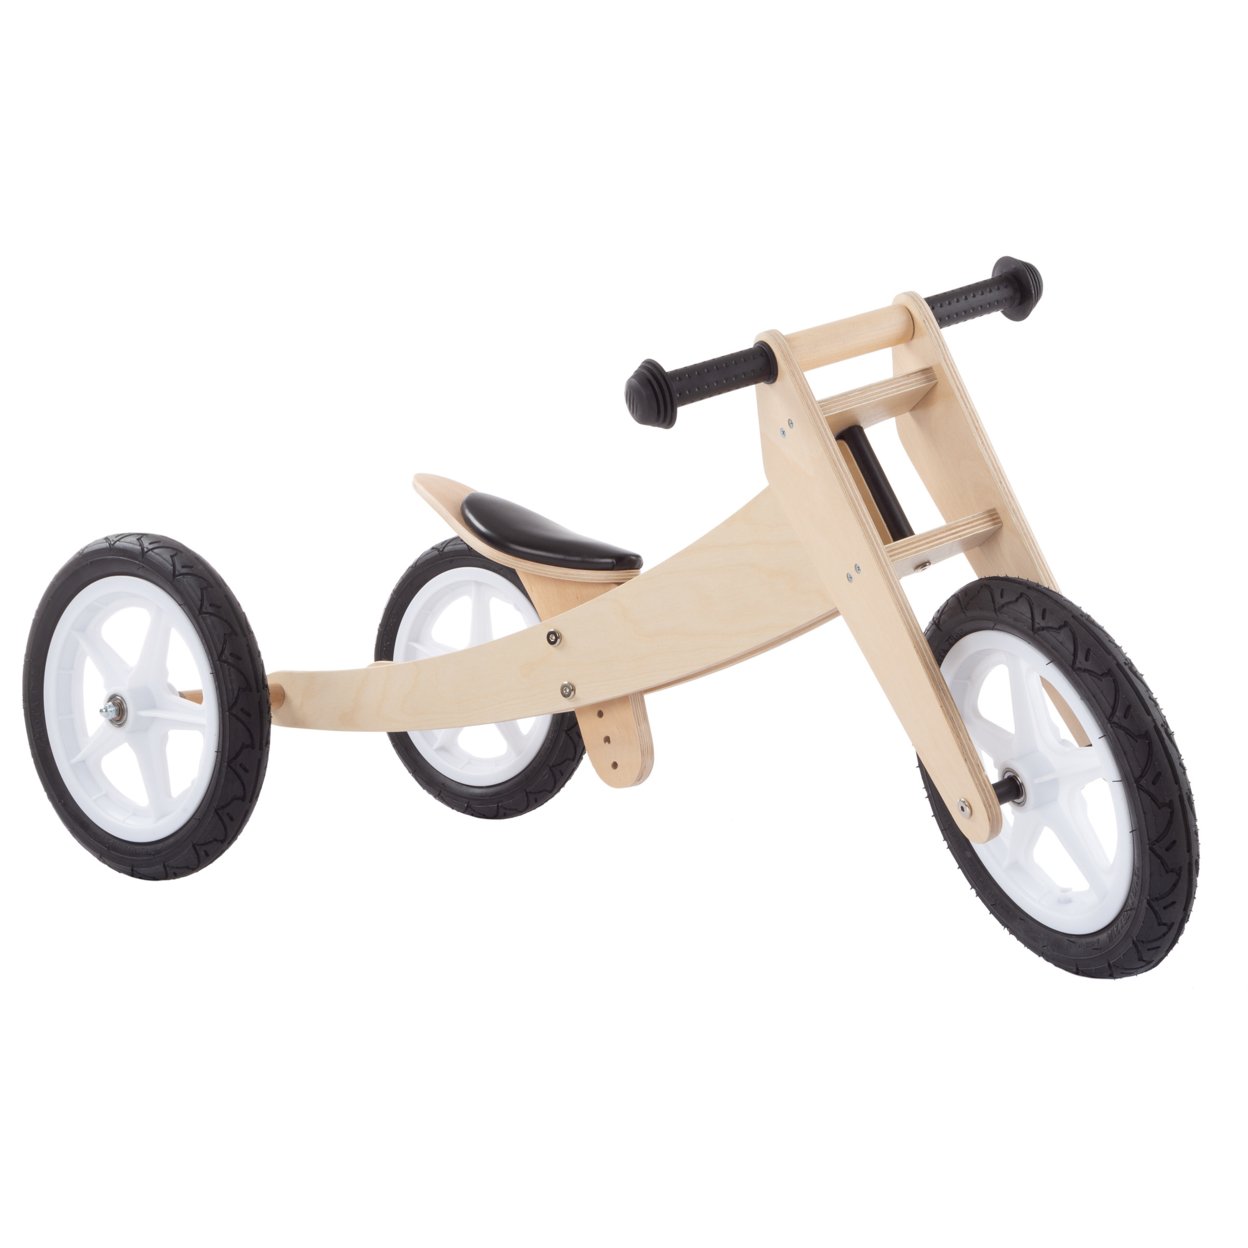 3-in-1 Balance Bike Multistage Wooden Walking Beginner Tricycle Convertible Ride On Boys And Girls